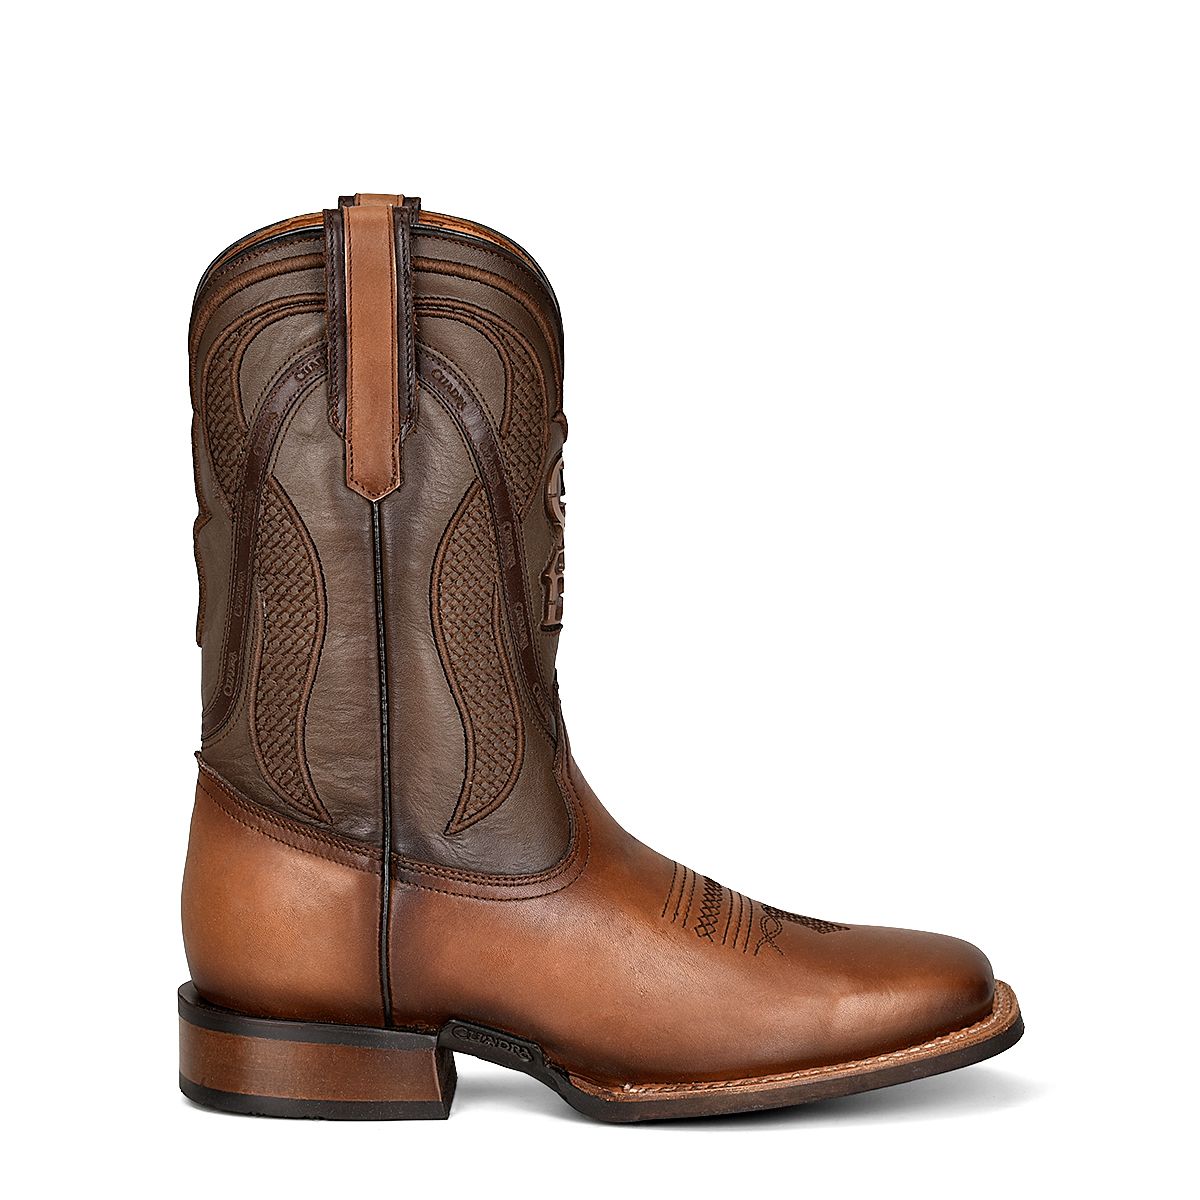 Rodeo cowboy honey brown leather boots (3)